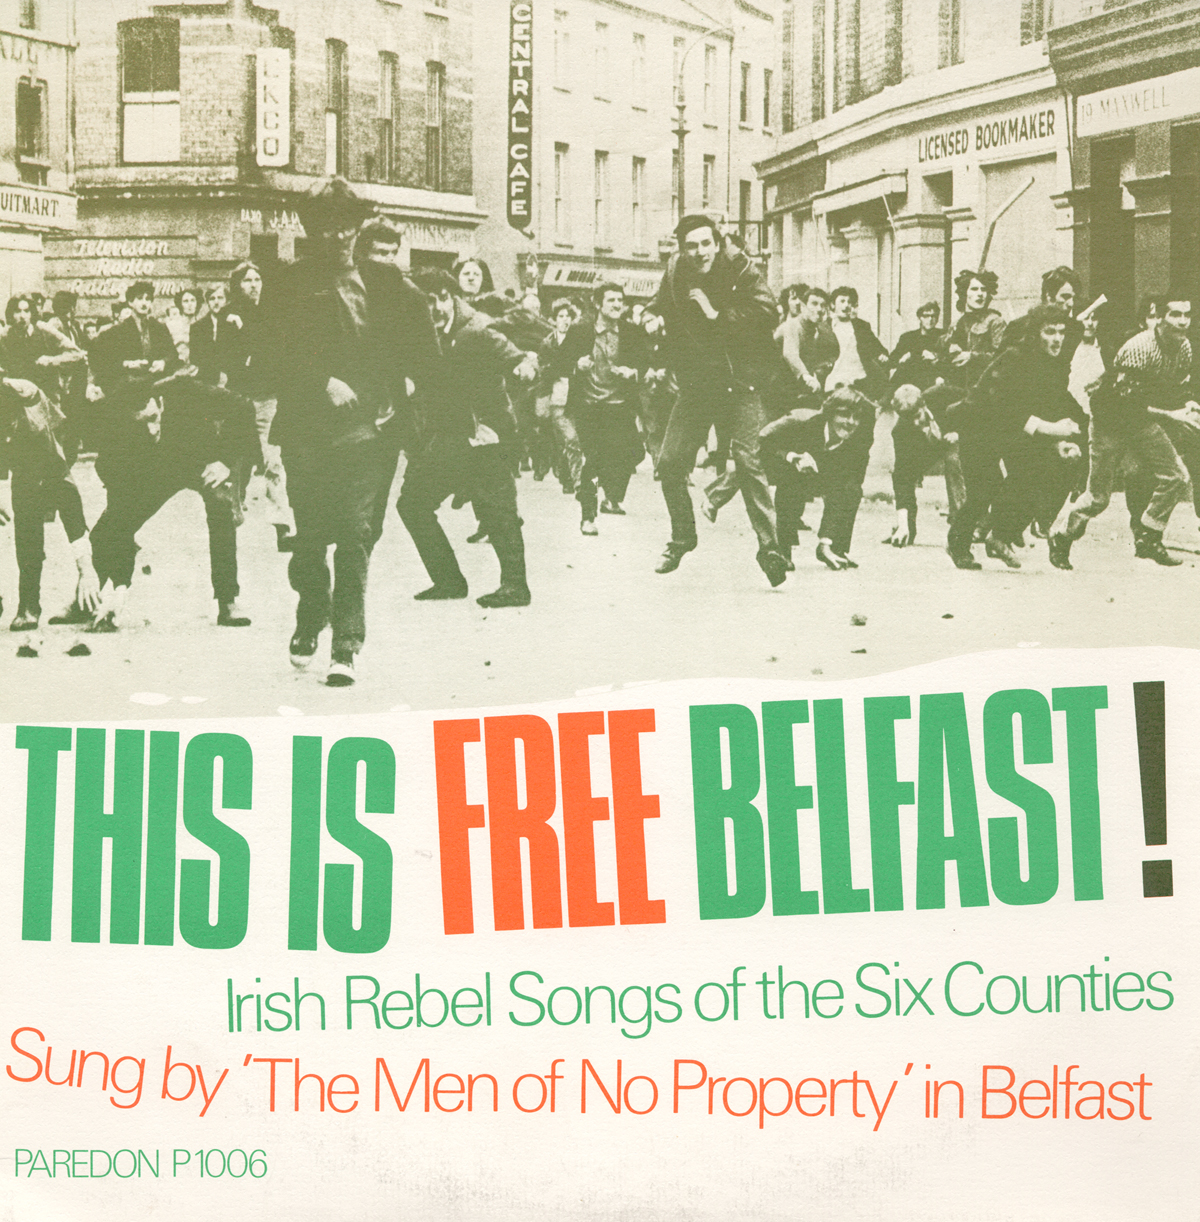 THIS IS FREE BELFAST